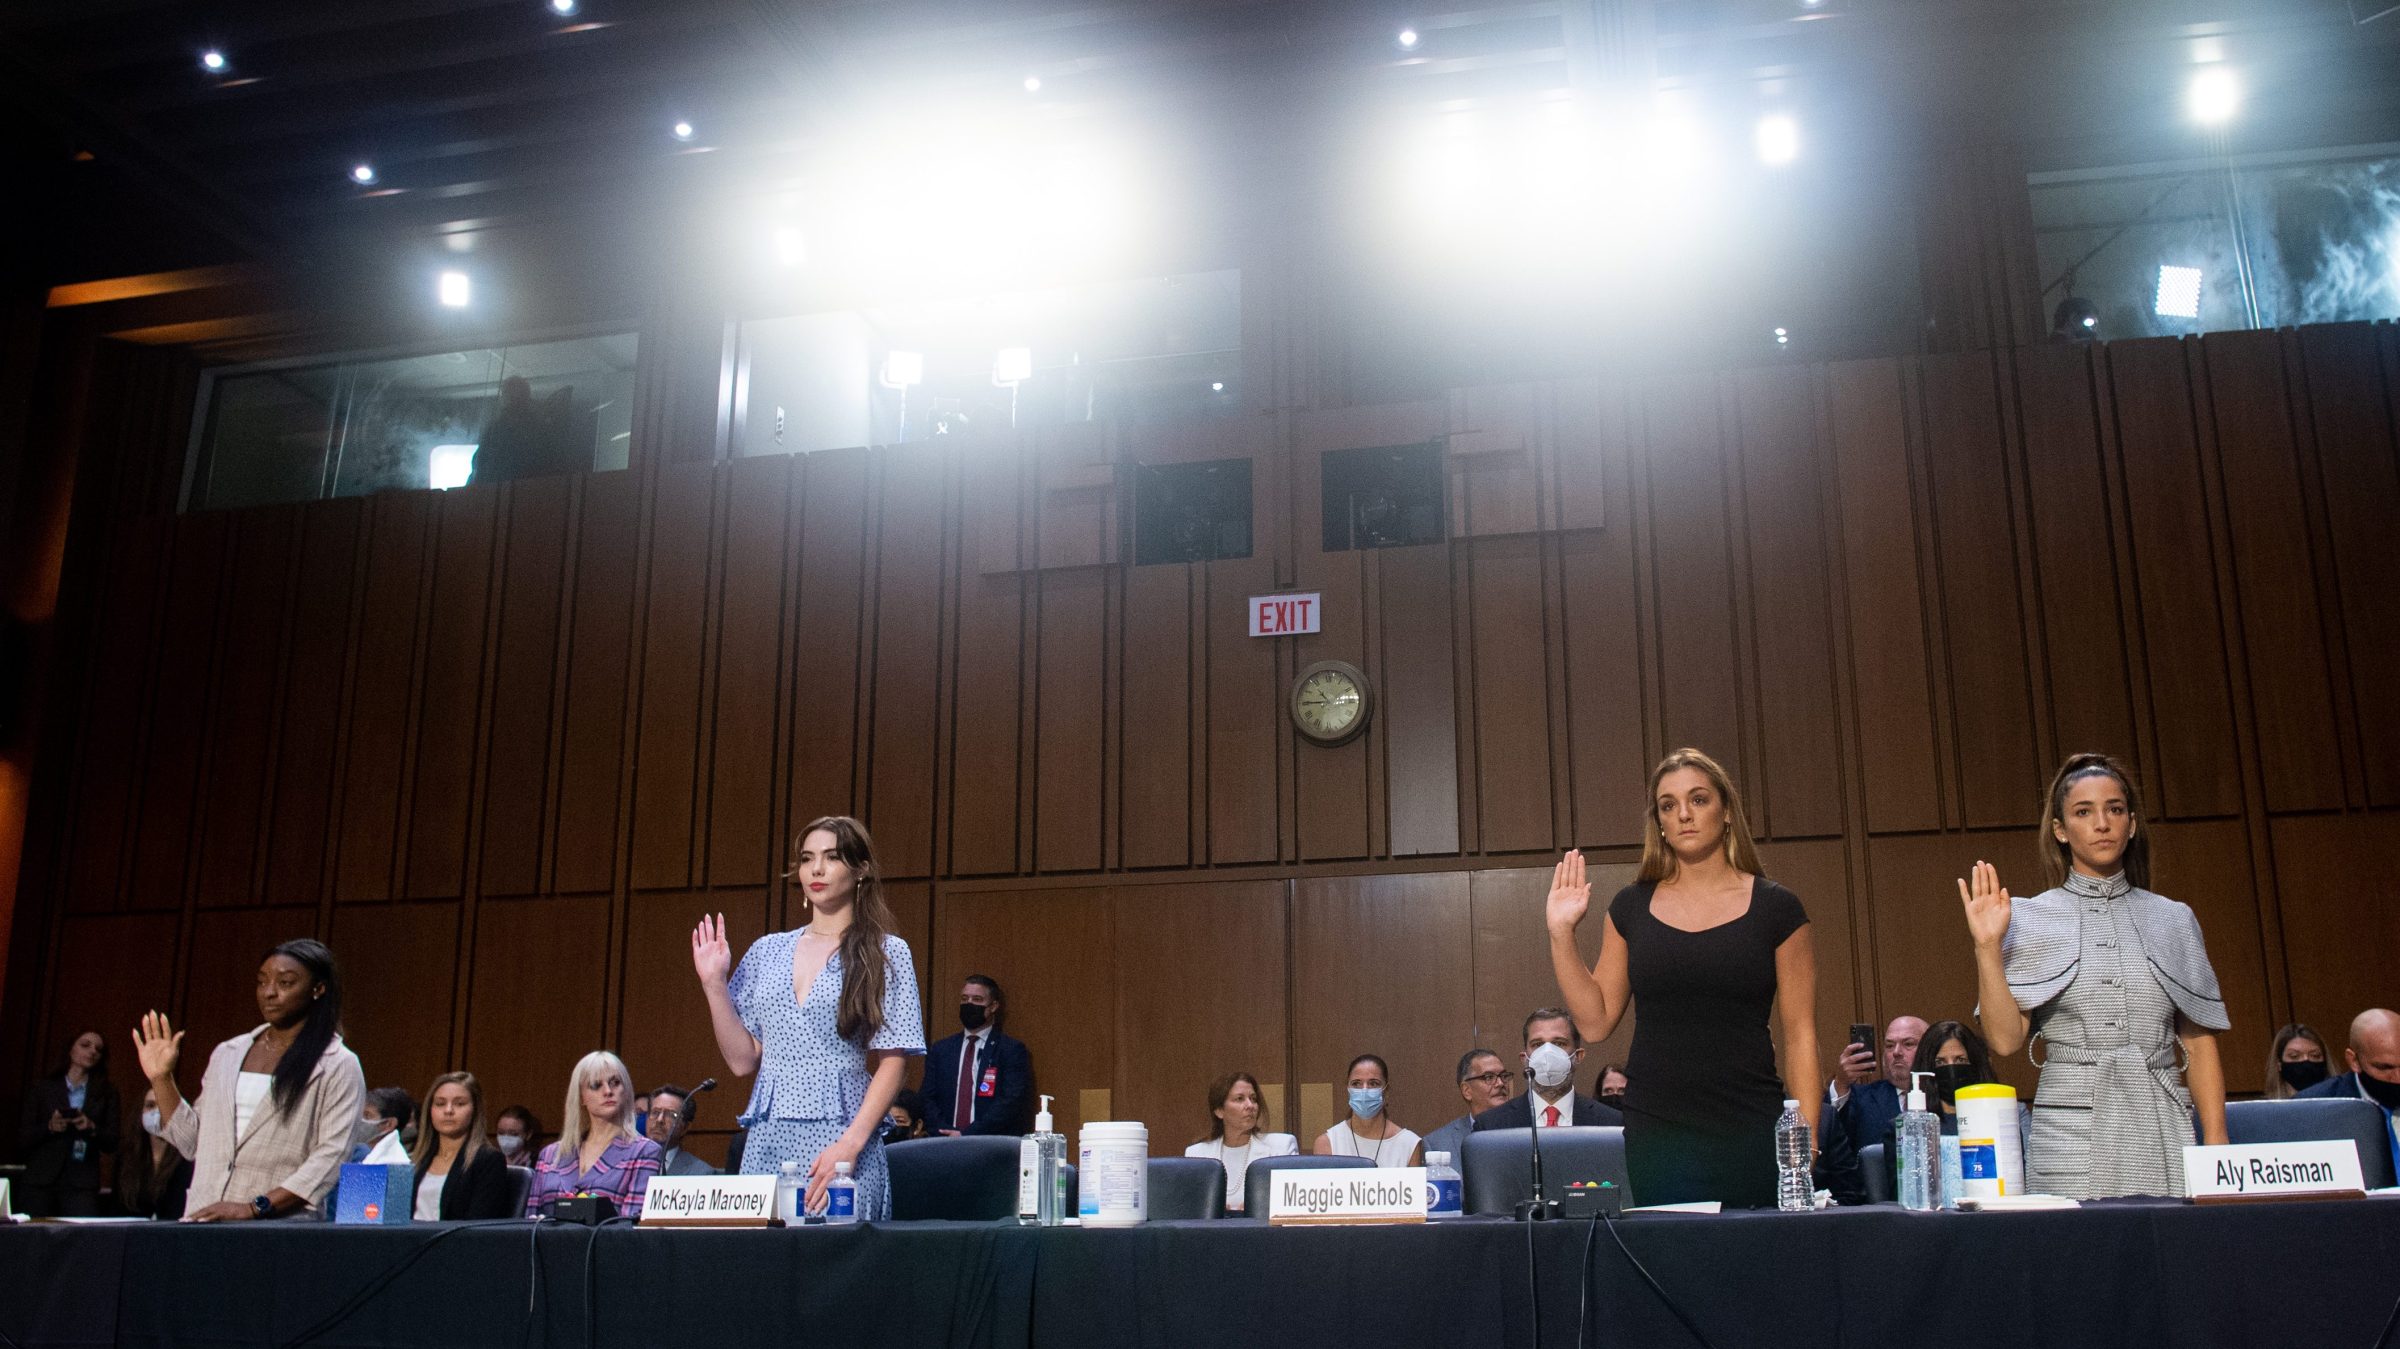 U.S. gymnasts Simone Biles, McKayla Maroney, Maggie Nichols and Aly Raisman are sworn in to testify during a Senate Judiciary hearing about the Inspector General's report on the FBI handling of the Larry Nassar investigation of sexual abuse of U.S. gymnasts, on Capitol Hill, September 15, 2021 in Washington, DC.